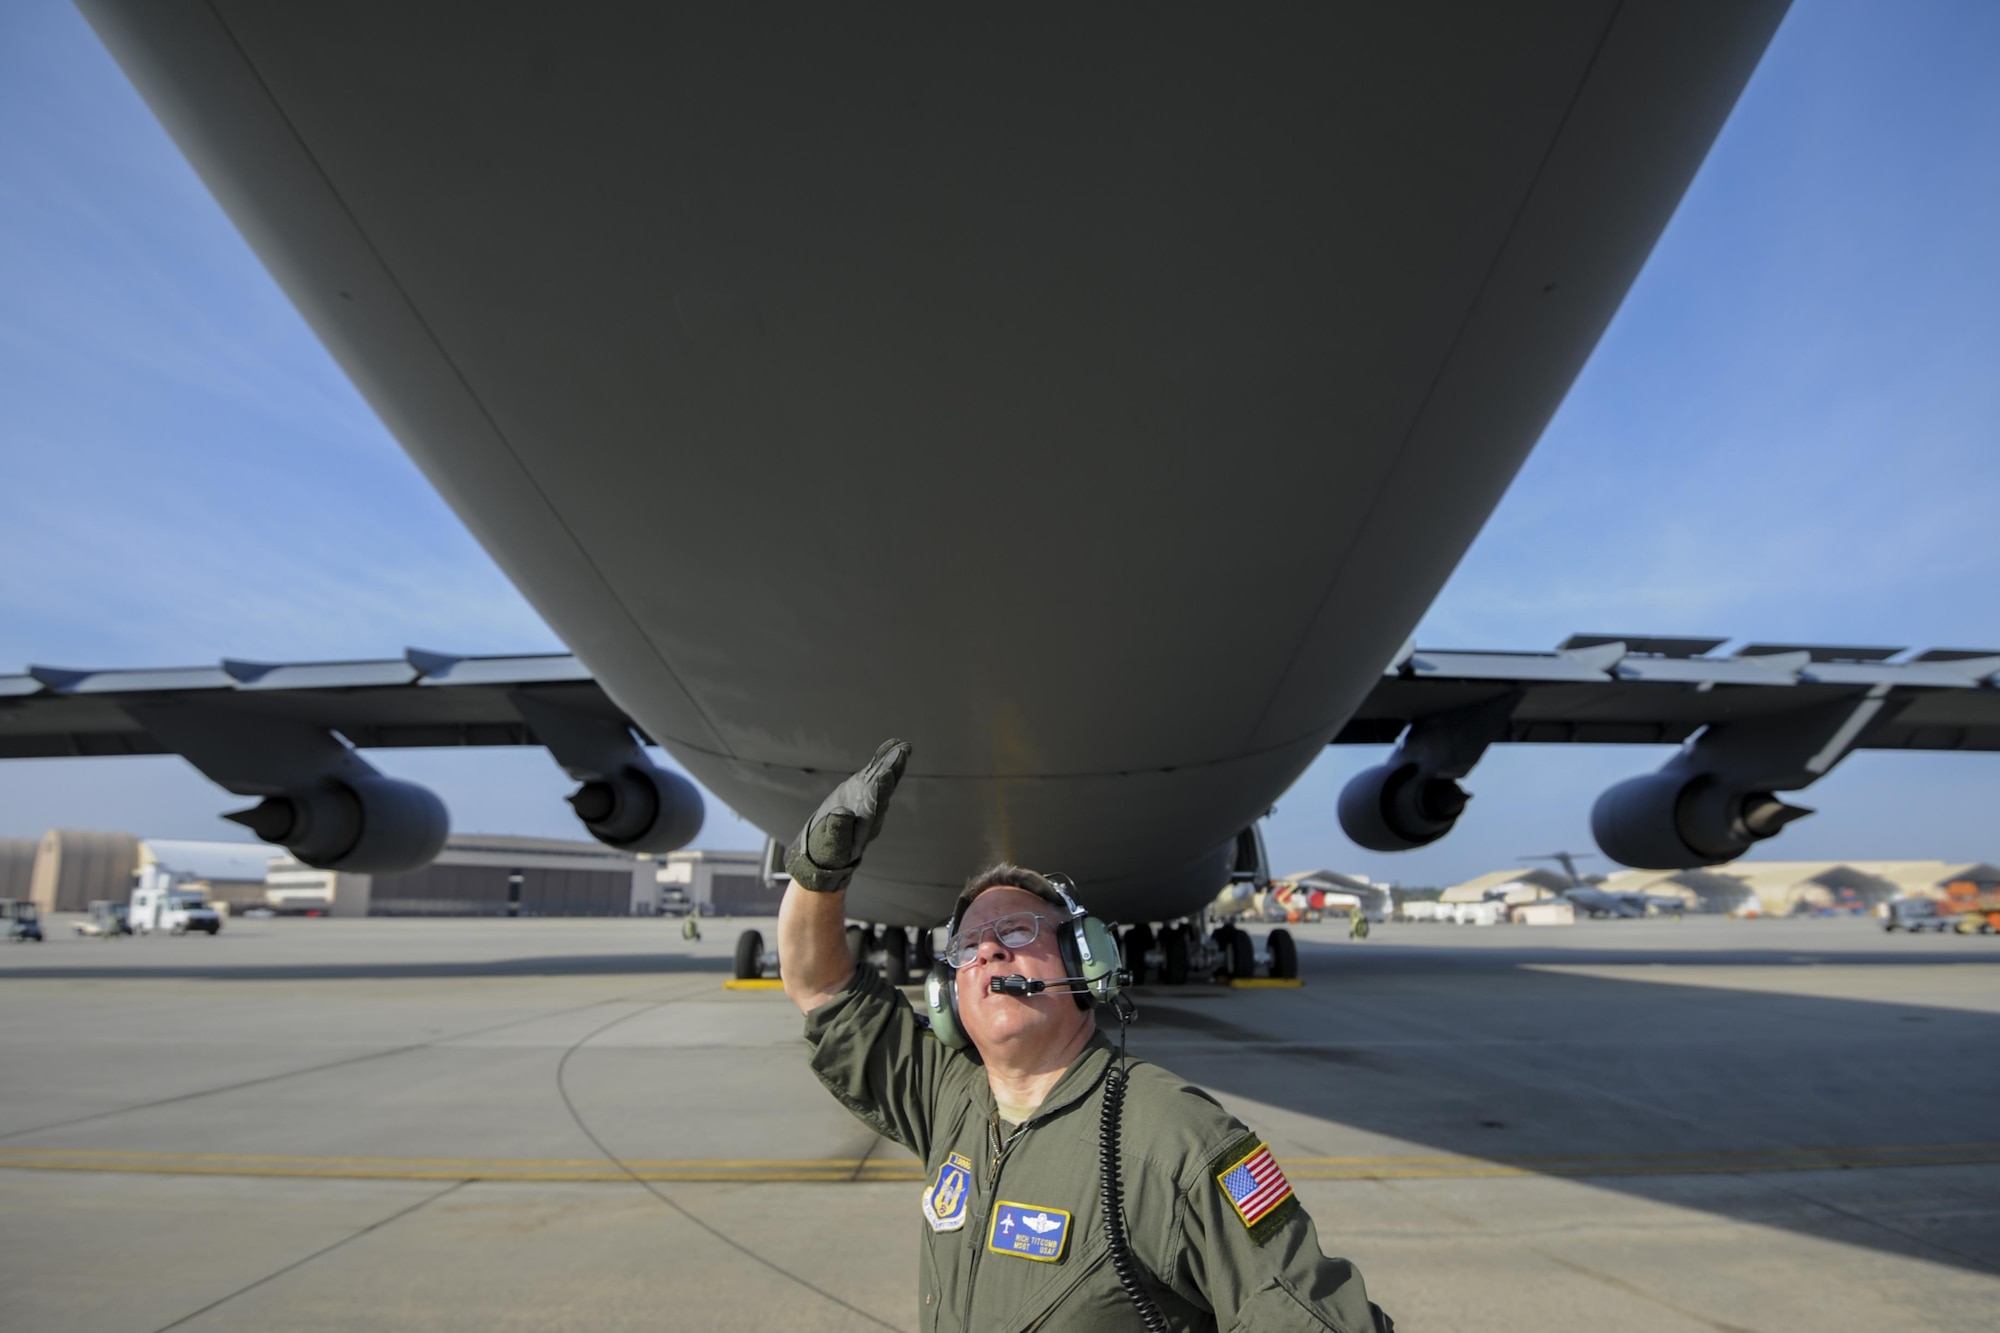 Master Sgt. Richard Titcomb, 339th Flight Test Squadron C-5 flight engineer, performs pre-flight checks to a C-5M Super Galaxy March 29, 2017, at Robins Air Force Base, Ga. The check was part of the functional test stage of the aircraft’s programmed depot maintenance, a process designed to ensure aircraft are safe and mission ready. (U.S. Air Force photo by Jamal D. Sutter)